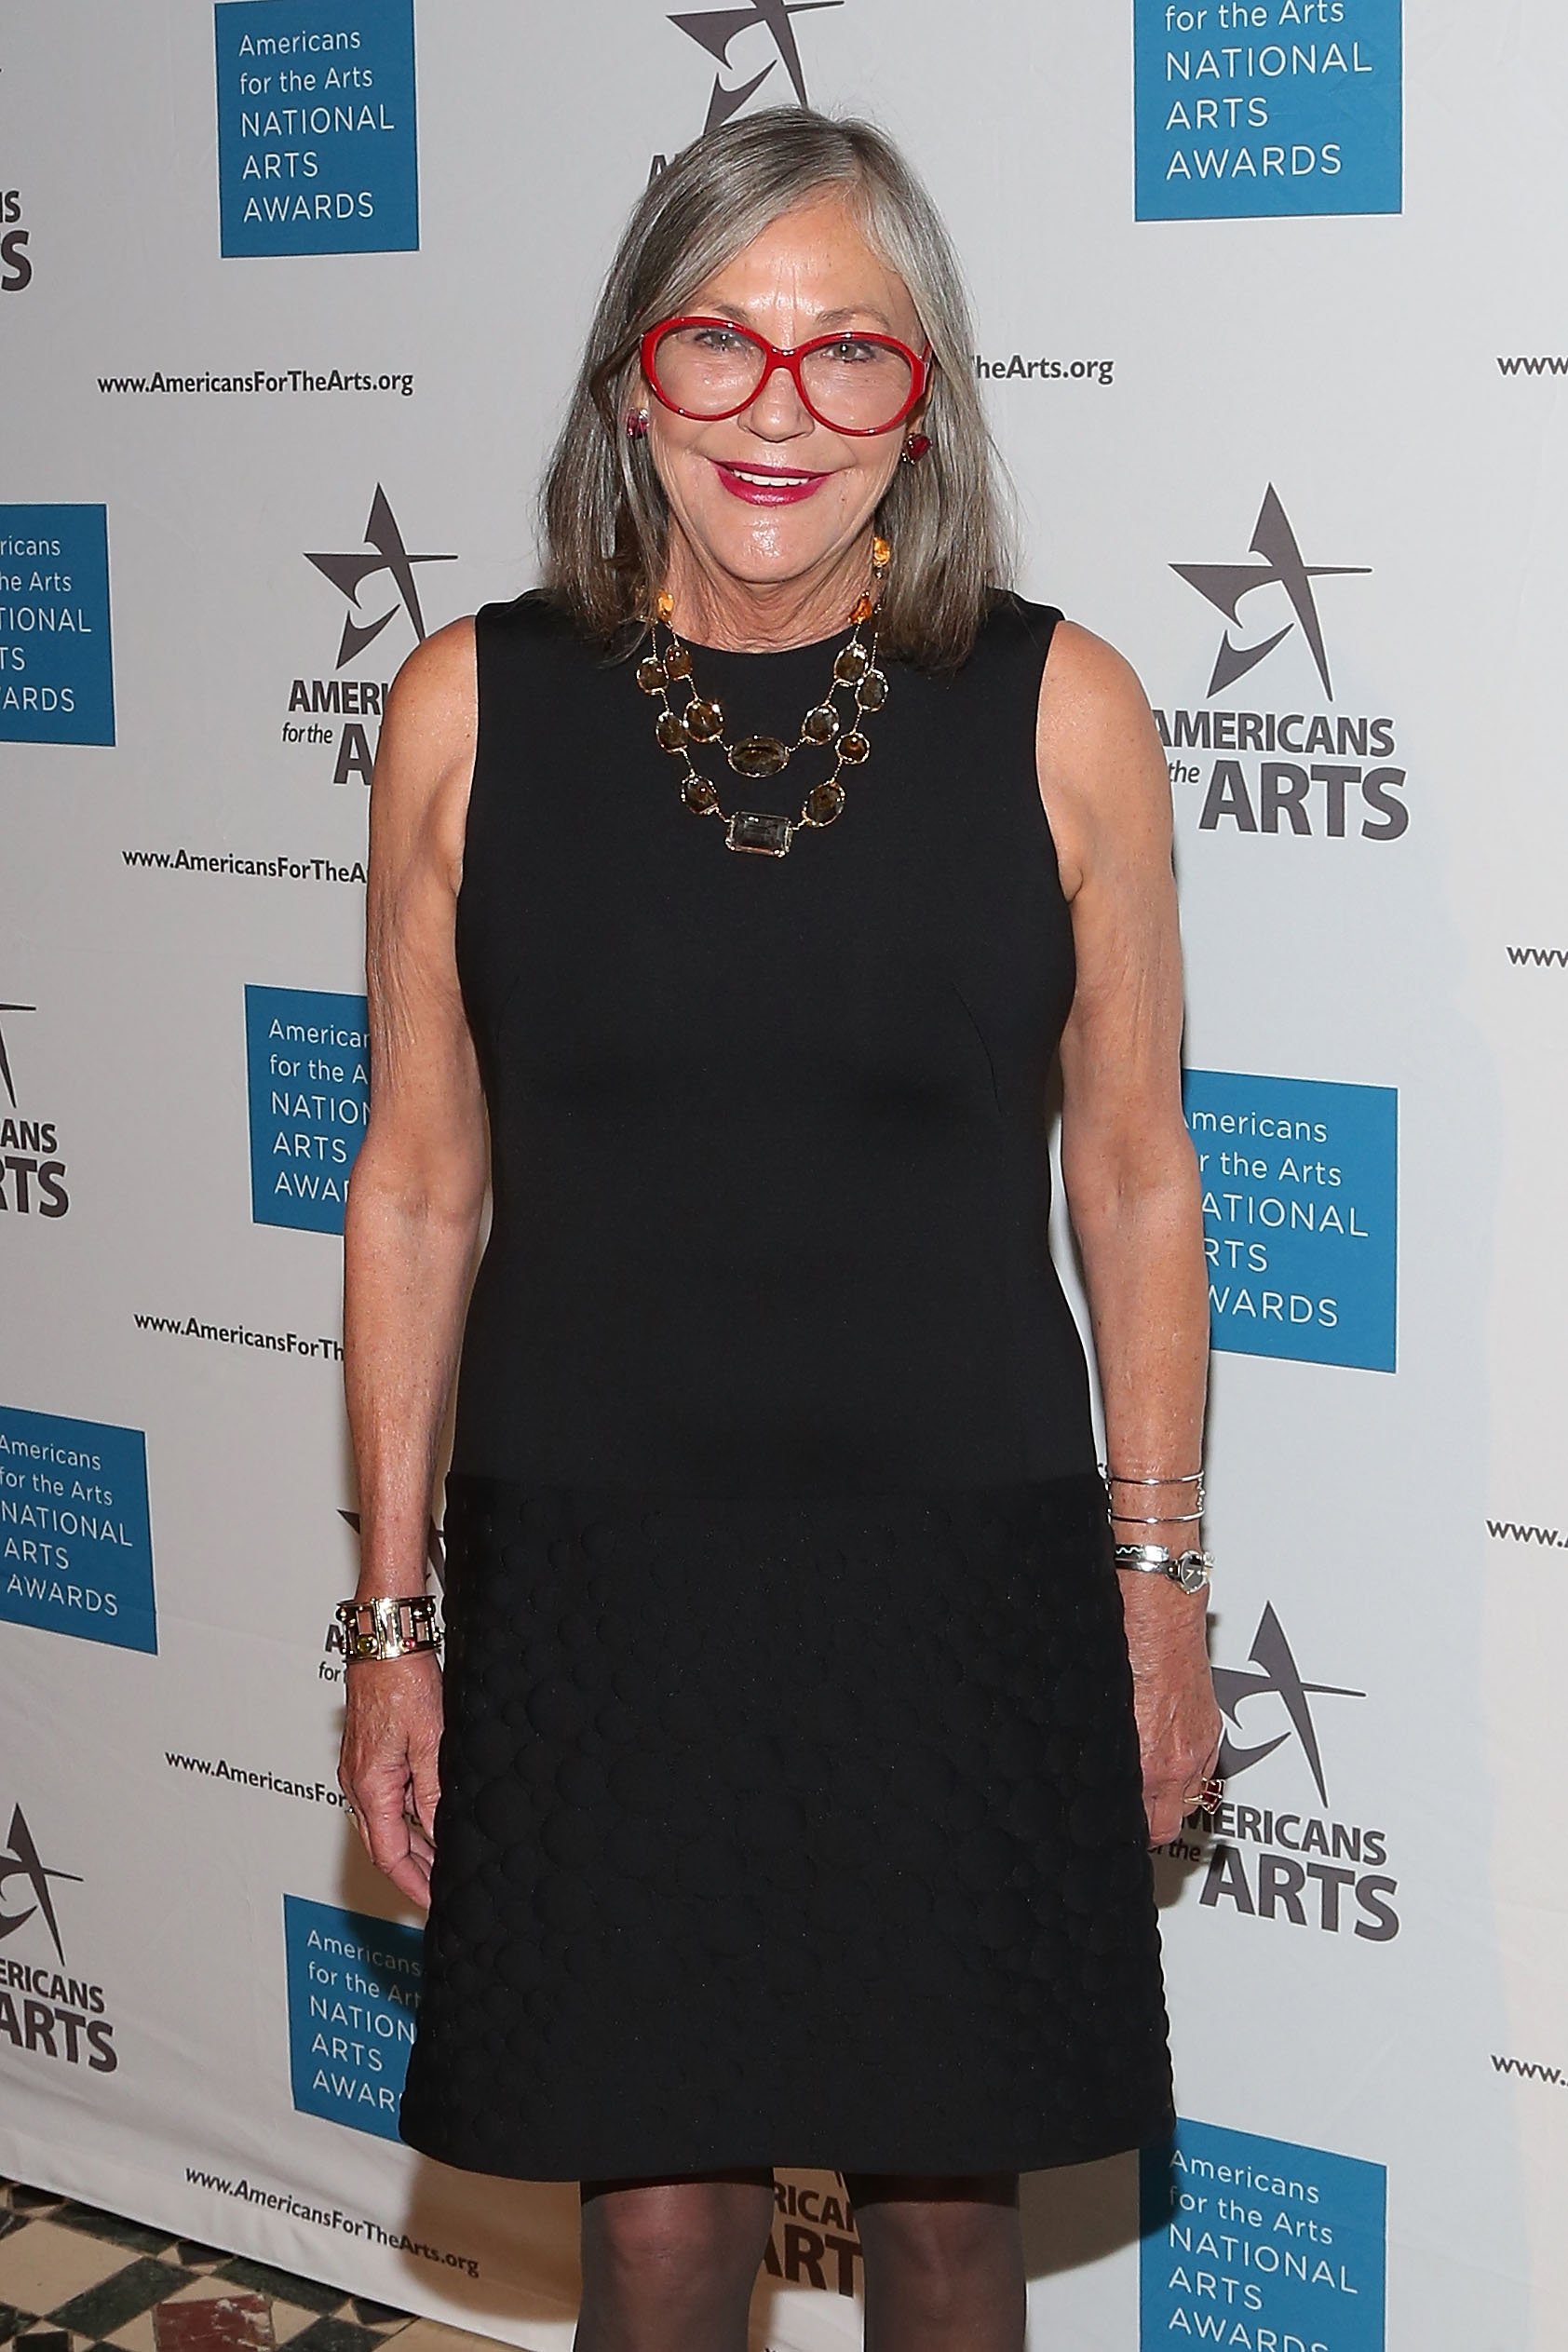 Alice Walton attends the 2015 National Arts Awards at Cipriani 42nd Street on October 19, 2015 | Photo: Getty Images